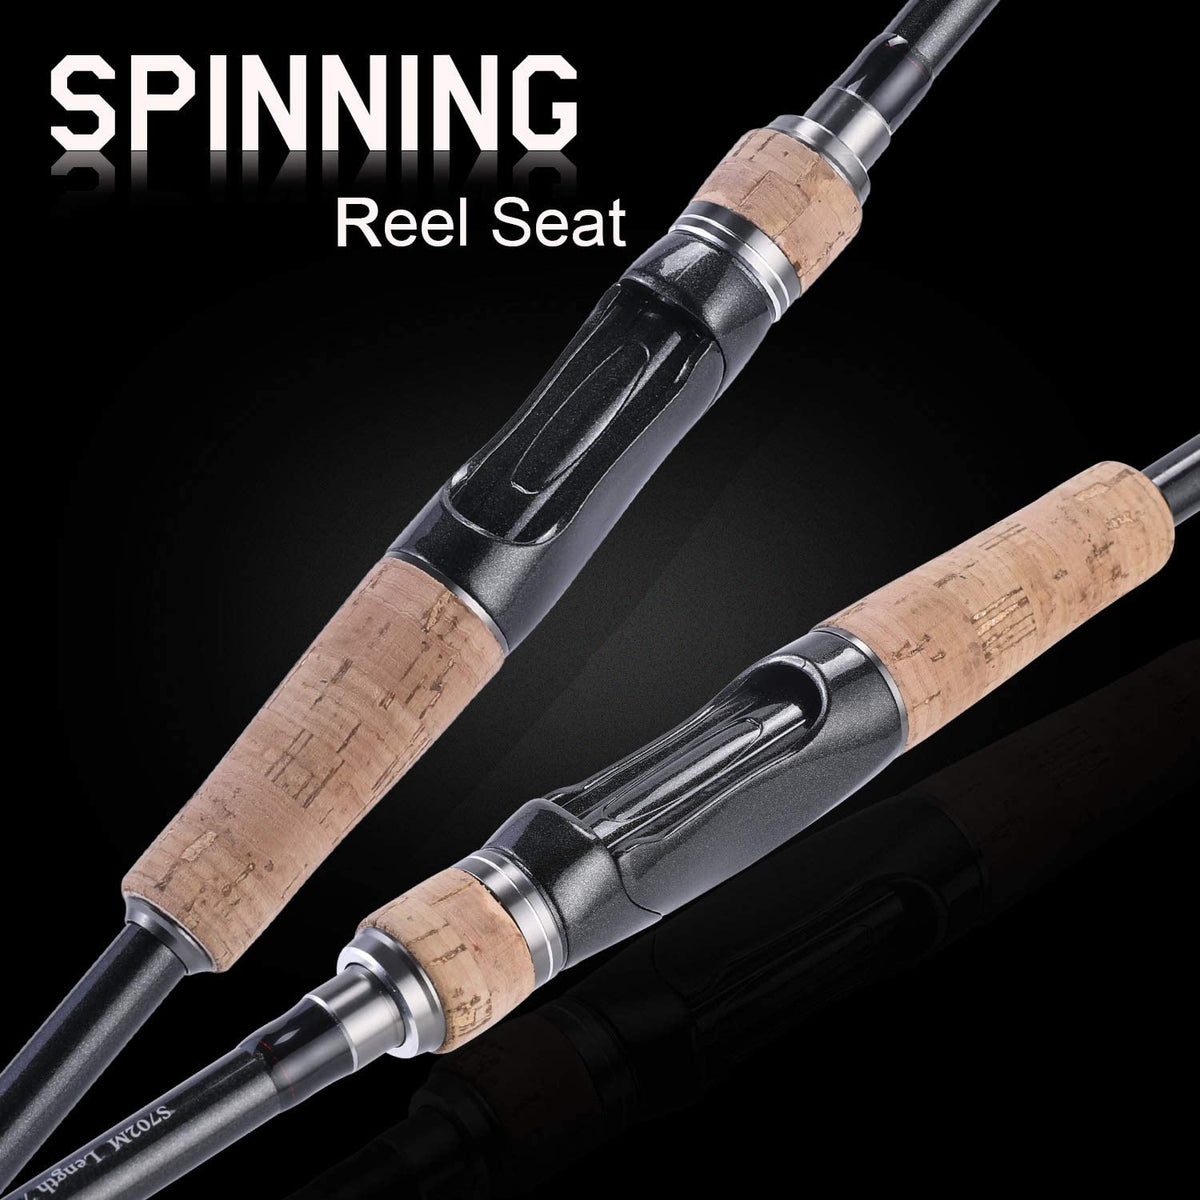 Tailored Tackle Tailored Tackle Bass Fishing Rod and Reel Baitcasting Combo  7 Ft Medium Heavy 2-Piece Baitcasting Rod 7 Ball Bearings 6.3:1 Gear Ratio Right  Handed Baitcaster Reel Fishing Pole : 